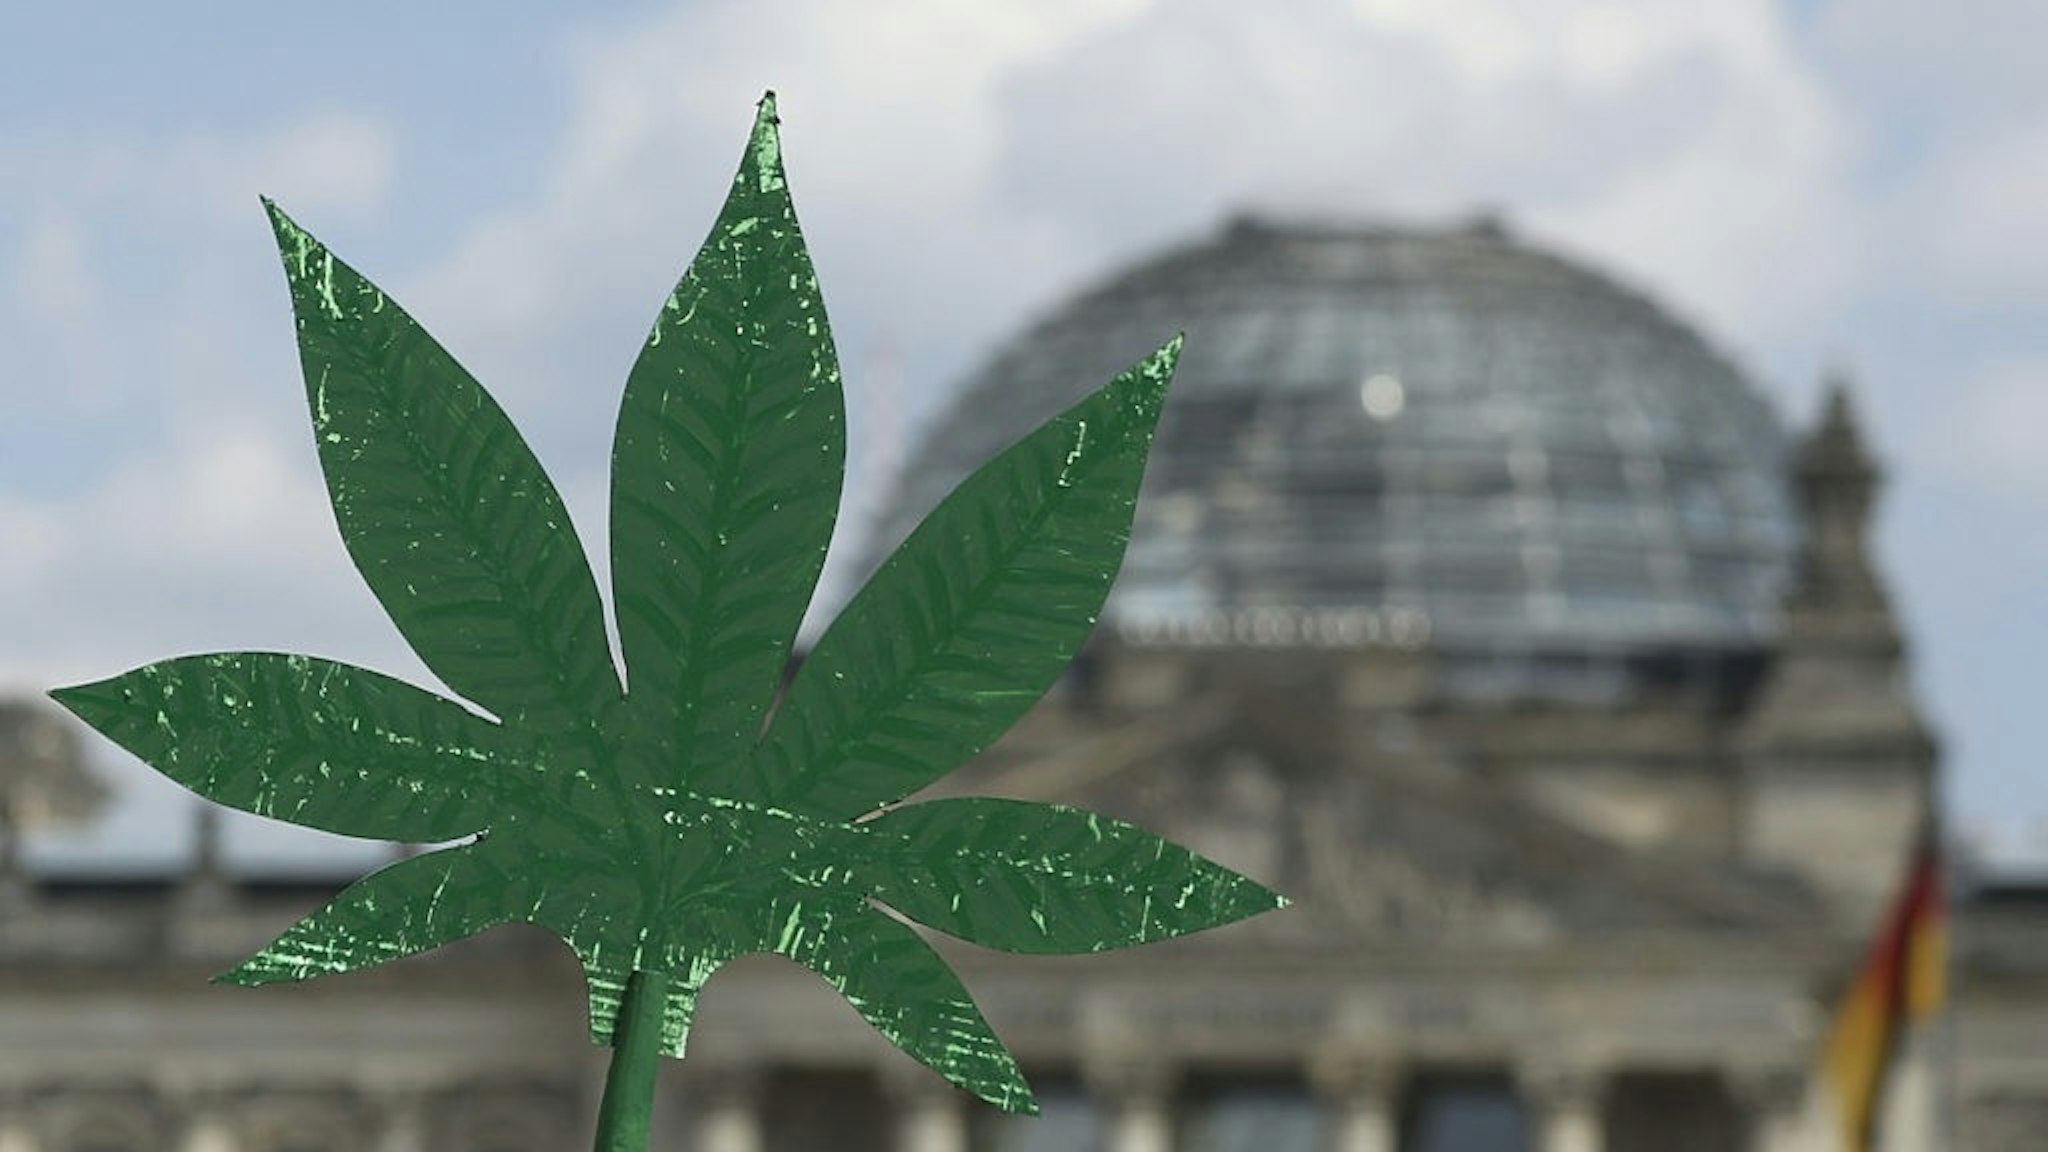 Berlin Hemp Parade 2016 BERLIN, GERMANY - AUGUST 13: Activists demanding the legalization of marijuana march past the Reichstag during the annual Hemp Parade (Hanfparade) on August 13, 2016 in Berlin, Germany. German proponents of cannabis legalization are hoping that the legalization in several states in the USA in recent years will increase the likelihood of legalization in Germany. (Photo by Sean Gallup/Getty Images) Sean Gallup / Staff